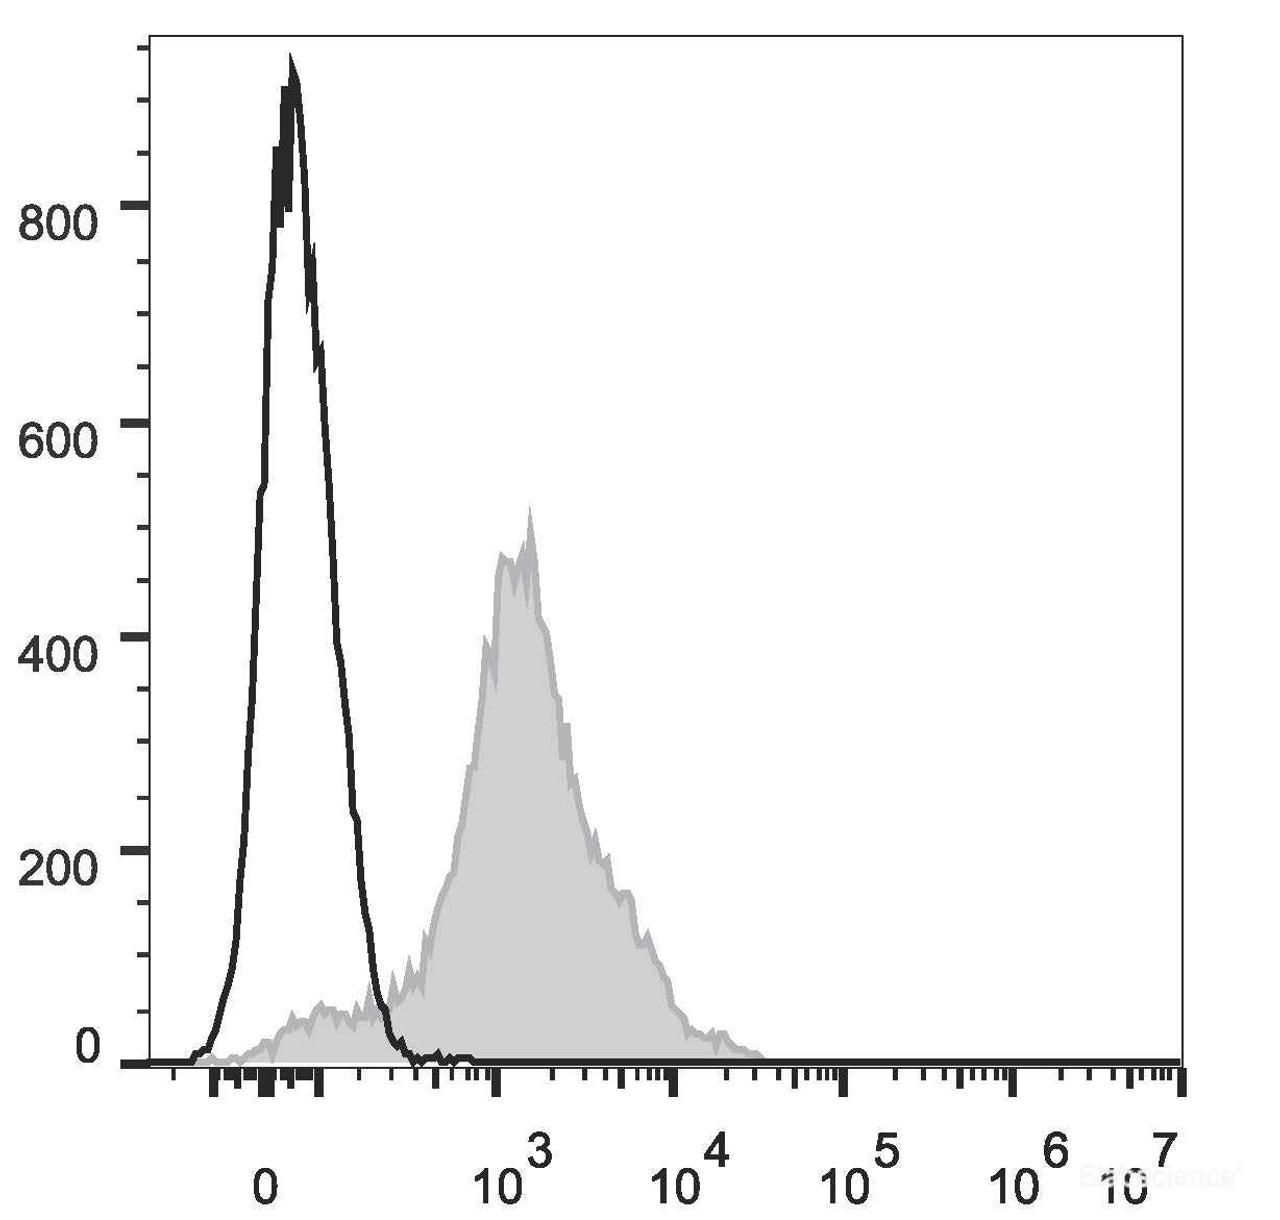 C57BL/6 murine splenocytes are stained with EV45 Anti-Mouse CD44 Antibody[Used at .2 μg/1<sup>6</sup> cells dilution](filled gray histogram). Unstained splenocytes (empty black histogram) are used as control.